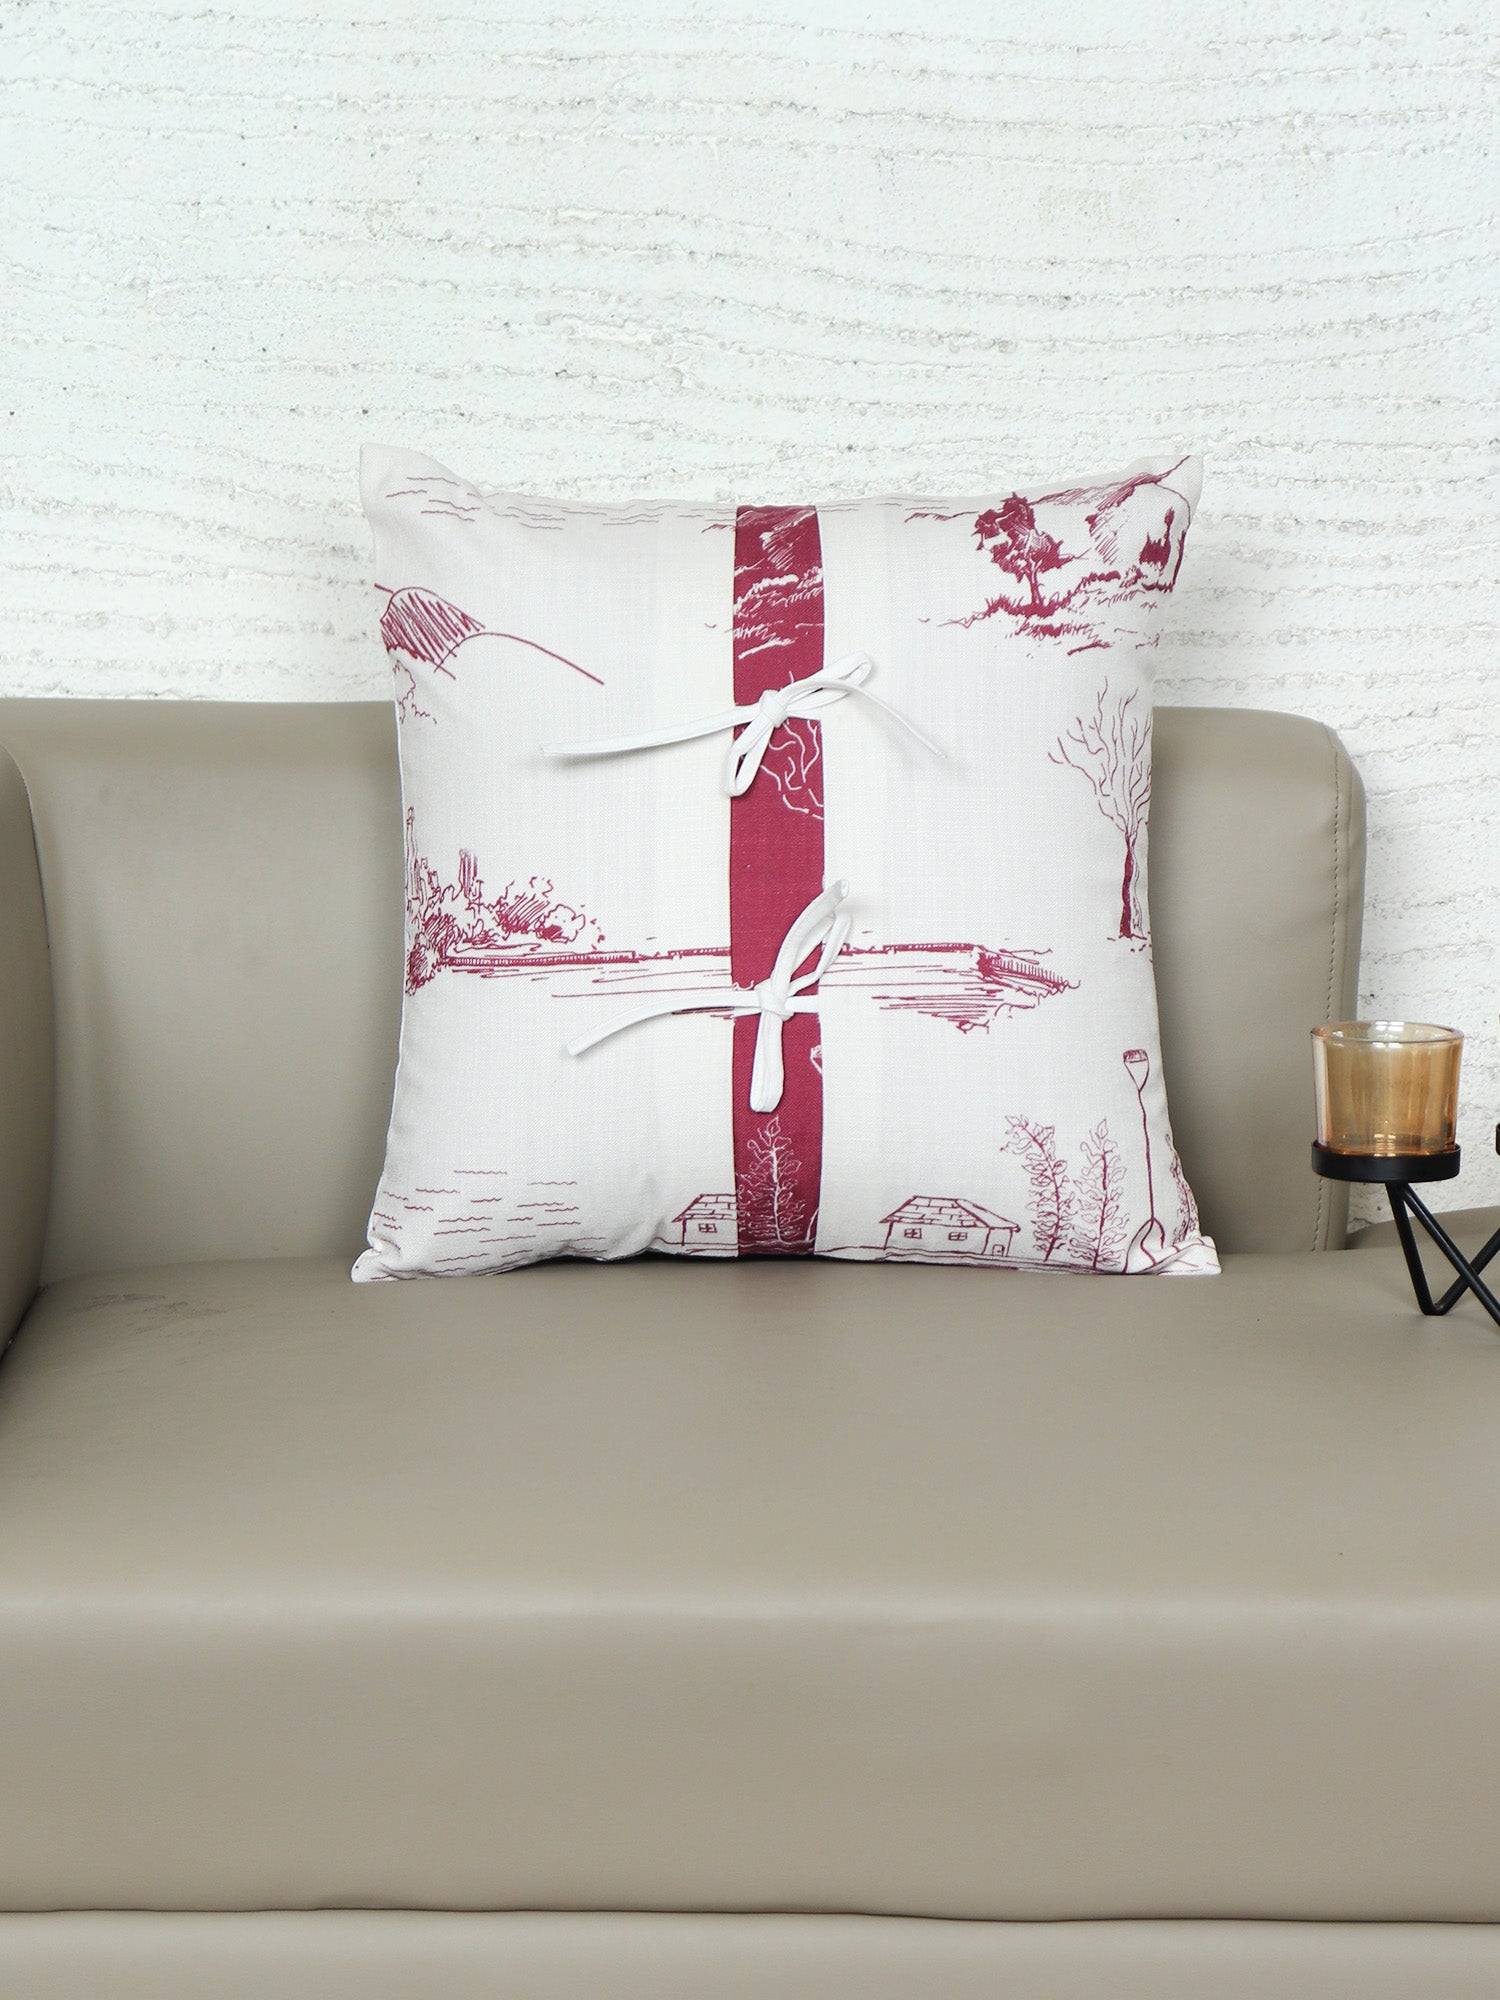 Cushion Cover - Luxe Collection | Sofa, Bedroom, Couch | Polycanvas Floral Printed with Overlapping Patch and Dori - Maroon on White - 16x16 inch (40x40 cms) (Pack of 1)